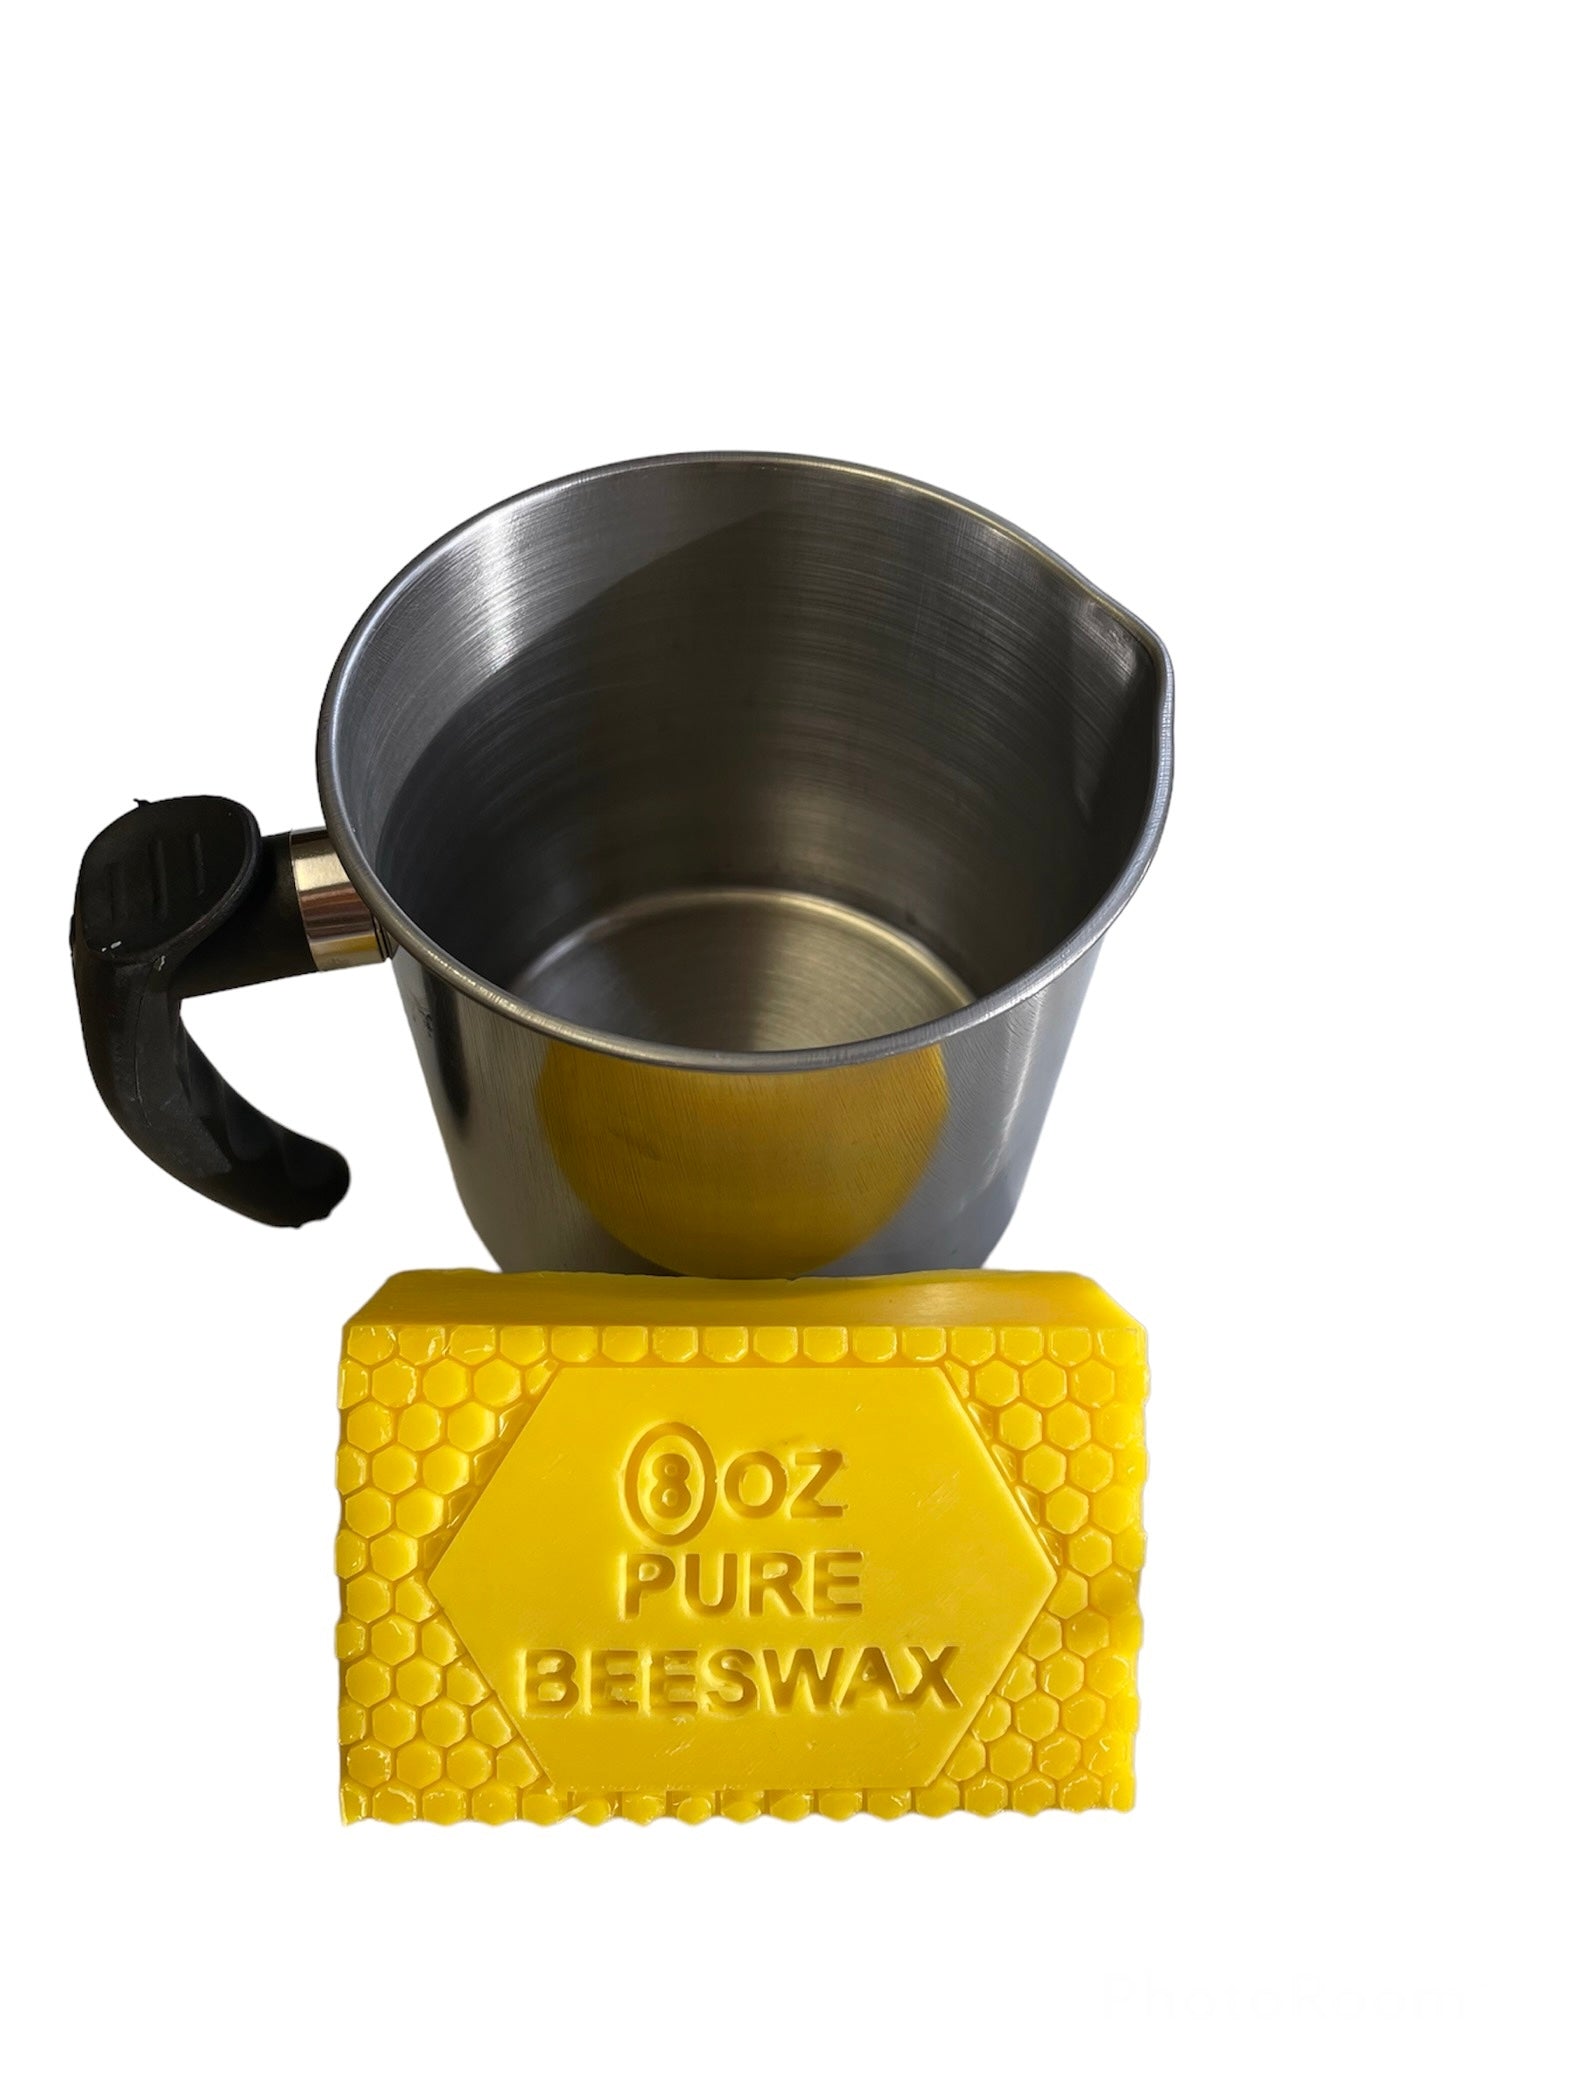 Stainless steel candle pouring pot with 100% pure beeswax – The